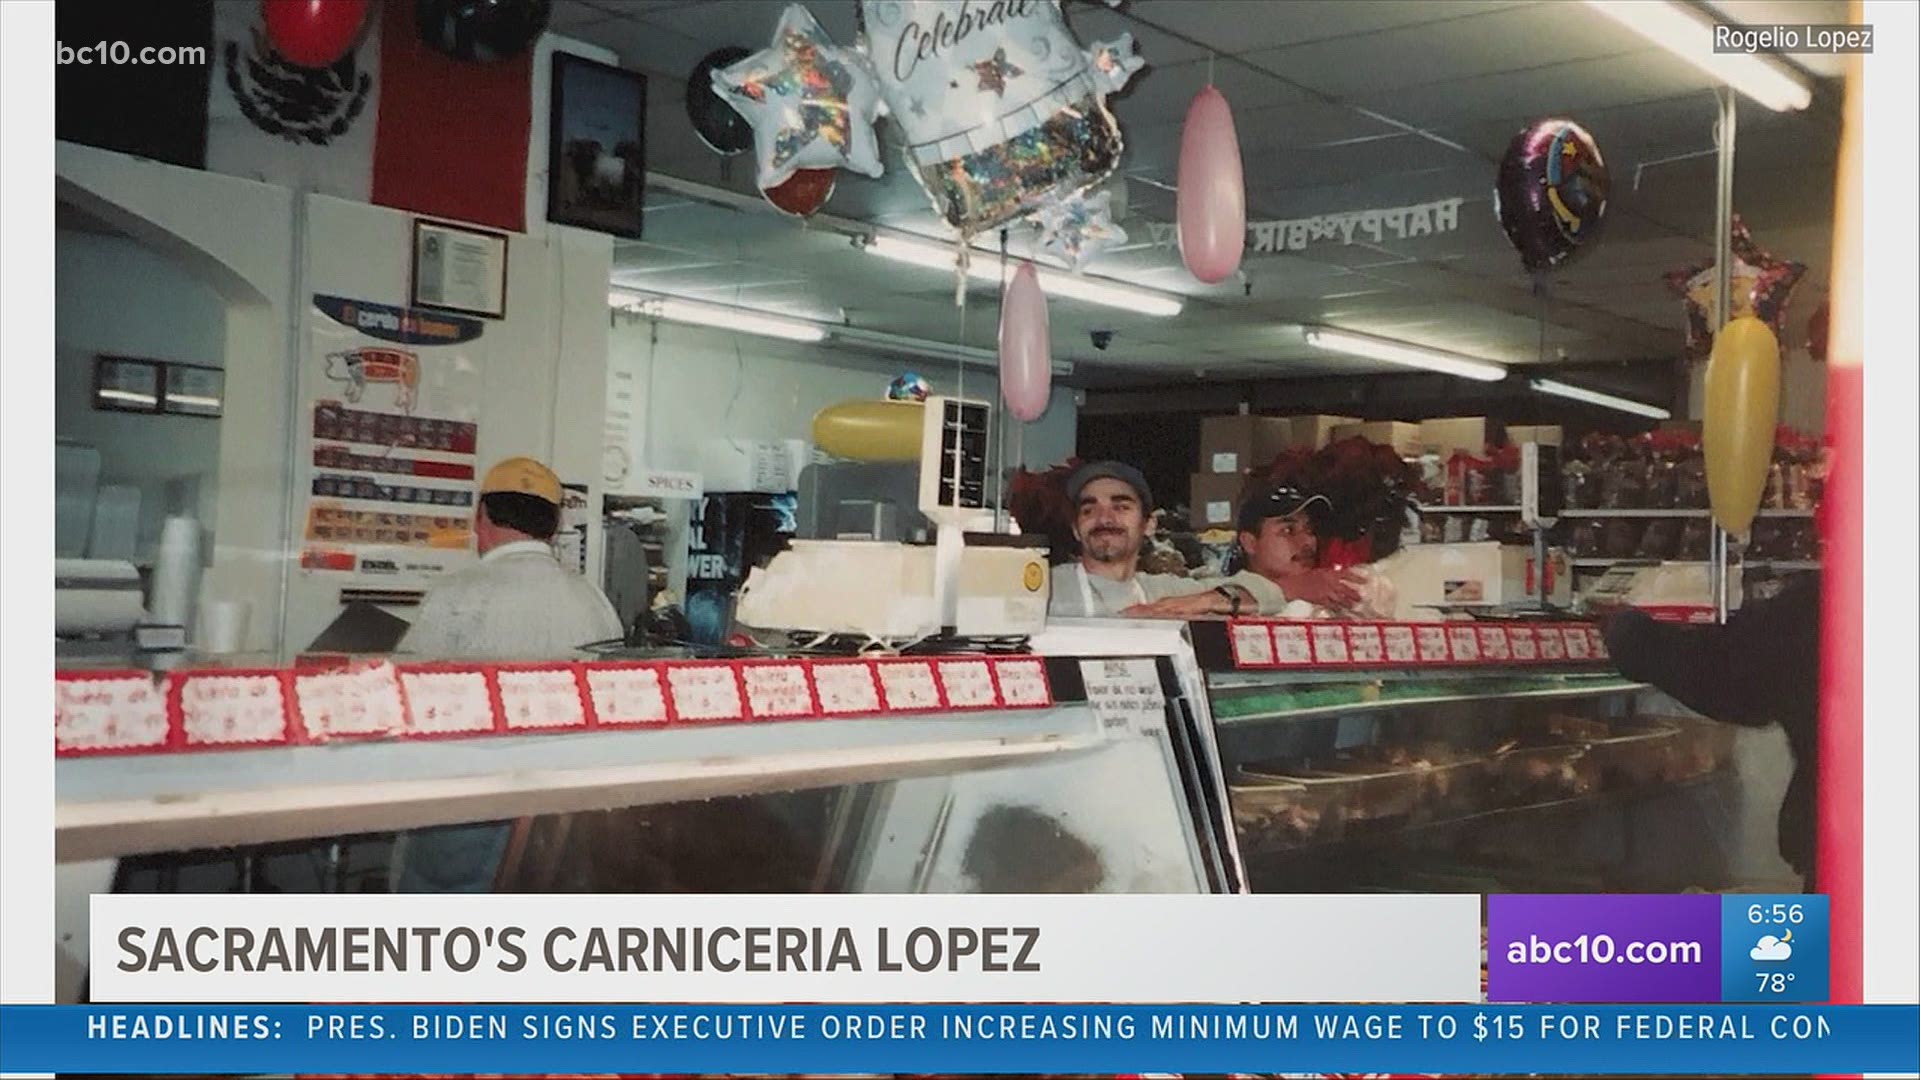 Carniceria Lopez started as a small store and is now a full meat market, deli and store. The business has become more than just a food store, but a community.